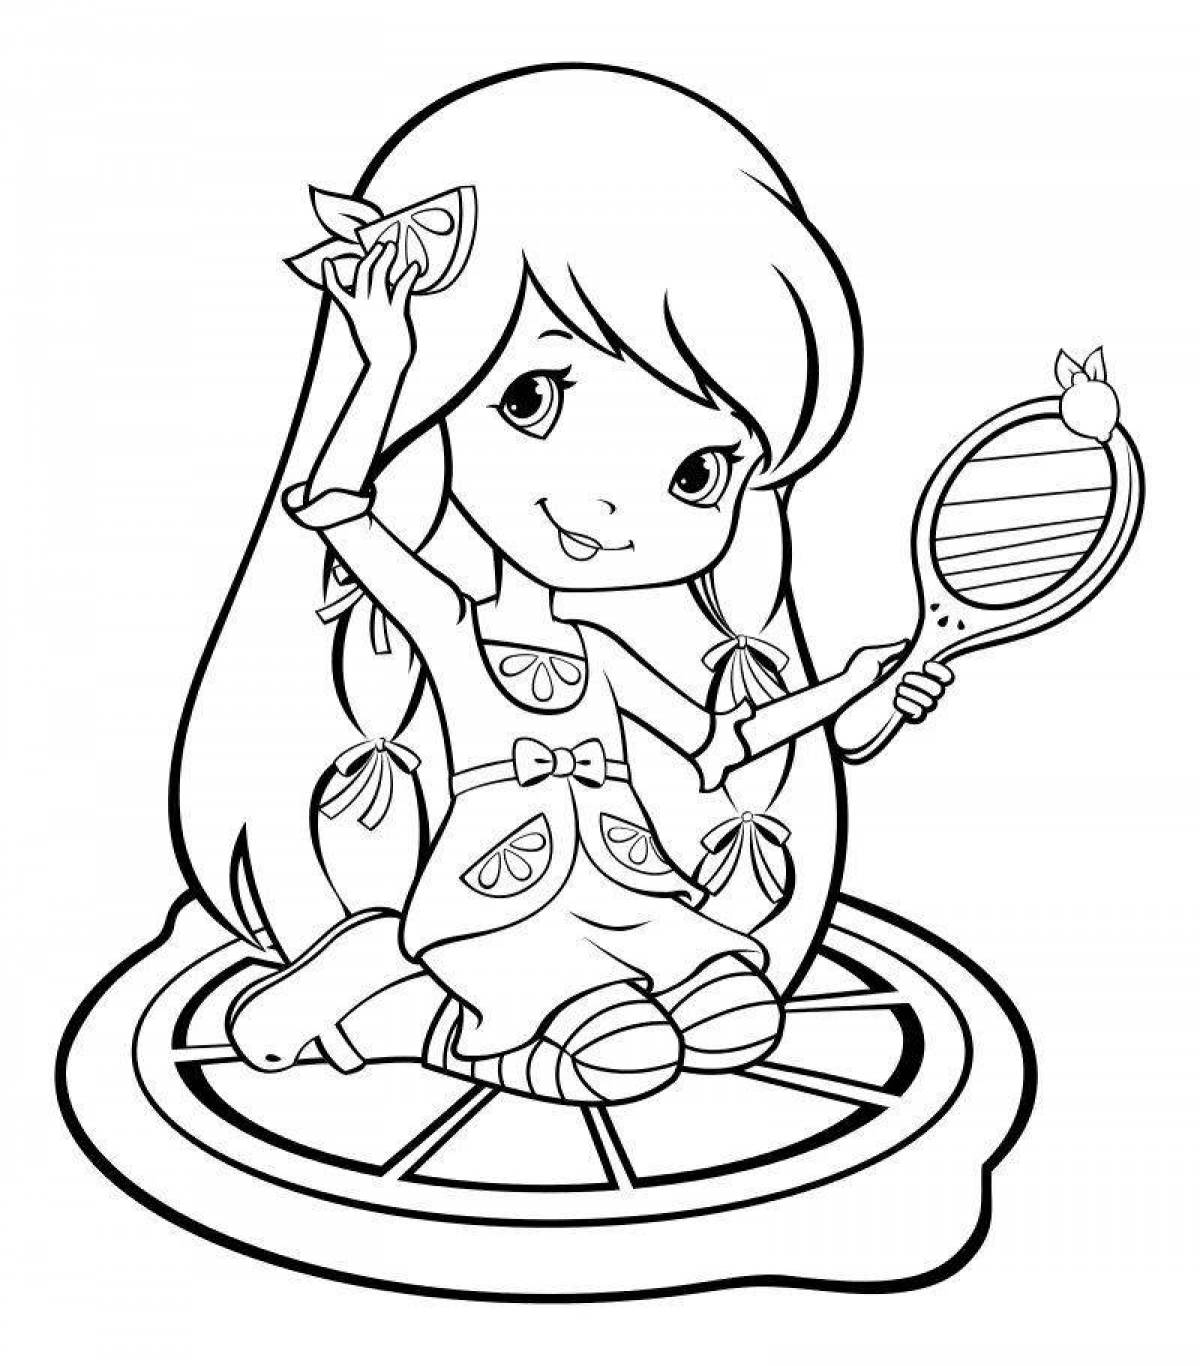 Amazing magical kitchen coloring book